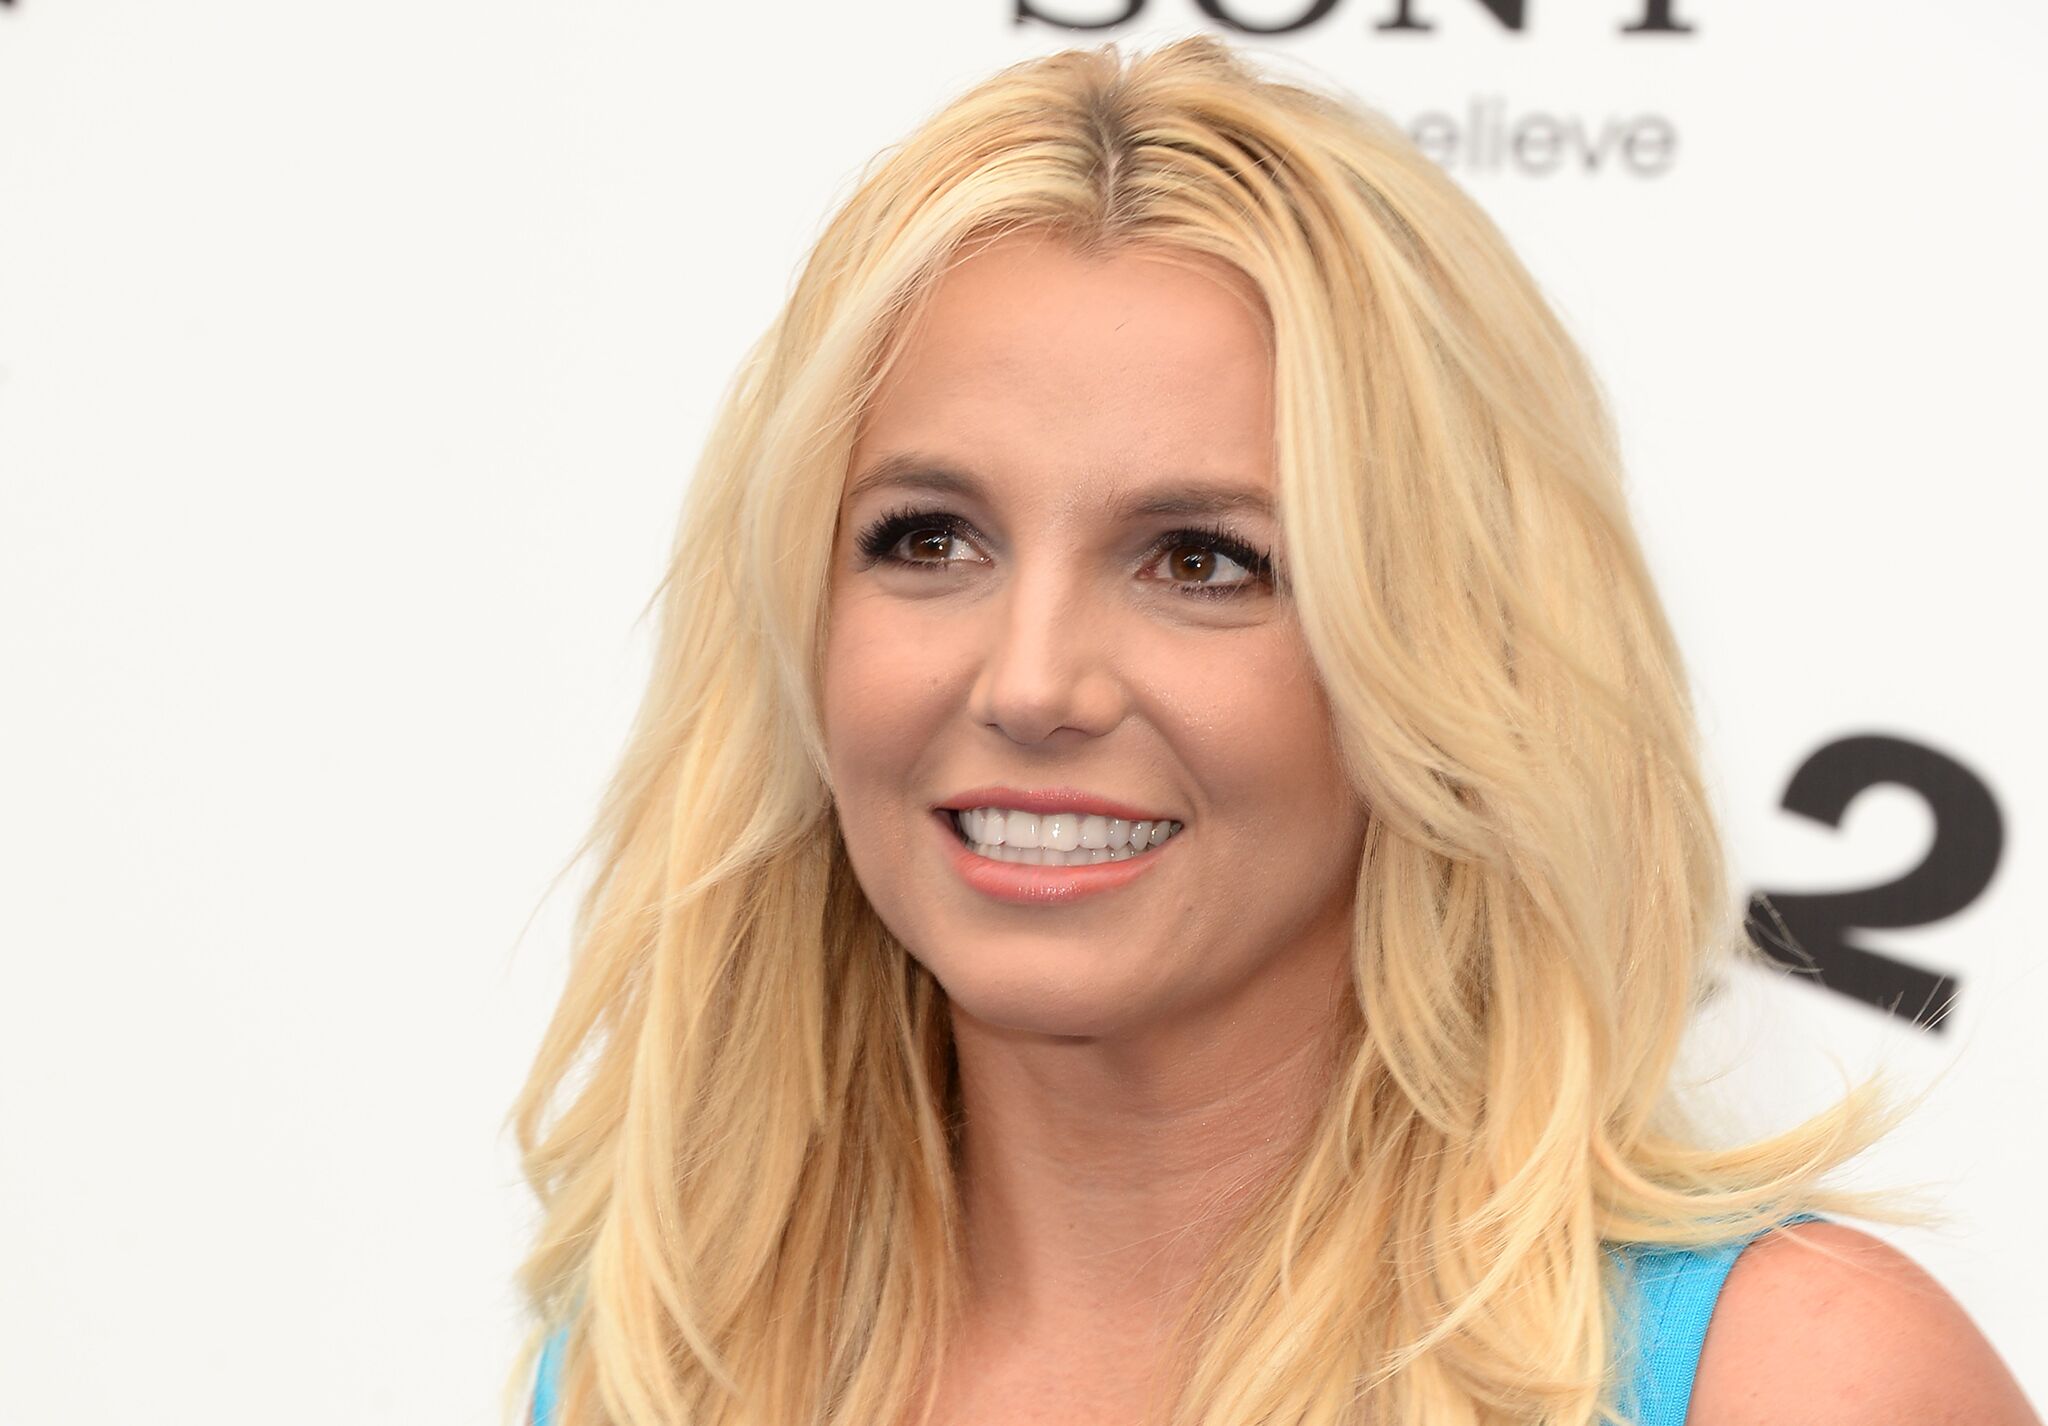 Singer Britney Spears attends the premiere of Columbia Pictures' "Smurfs 2" at Regency Village Theatre on July 28, 2013 | Photo: Getty Images